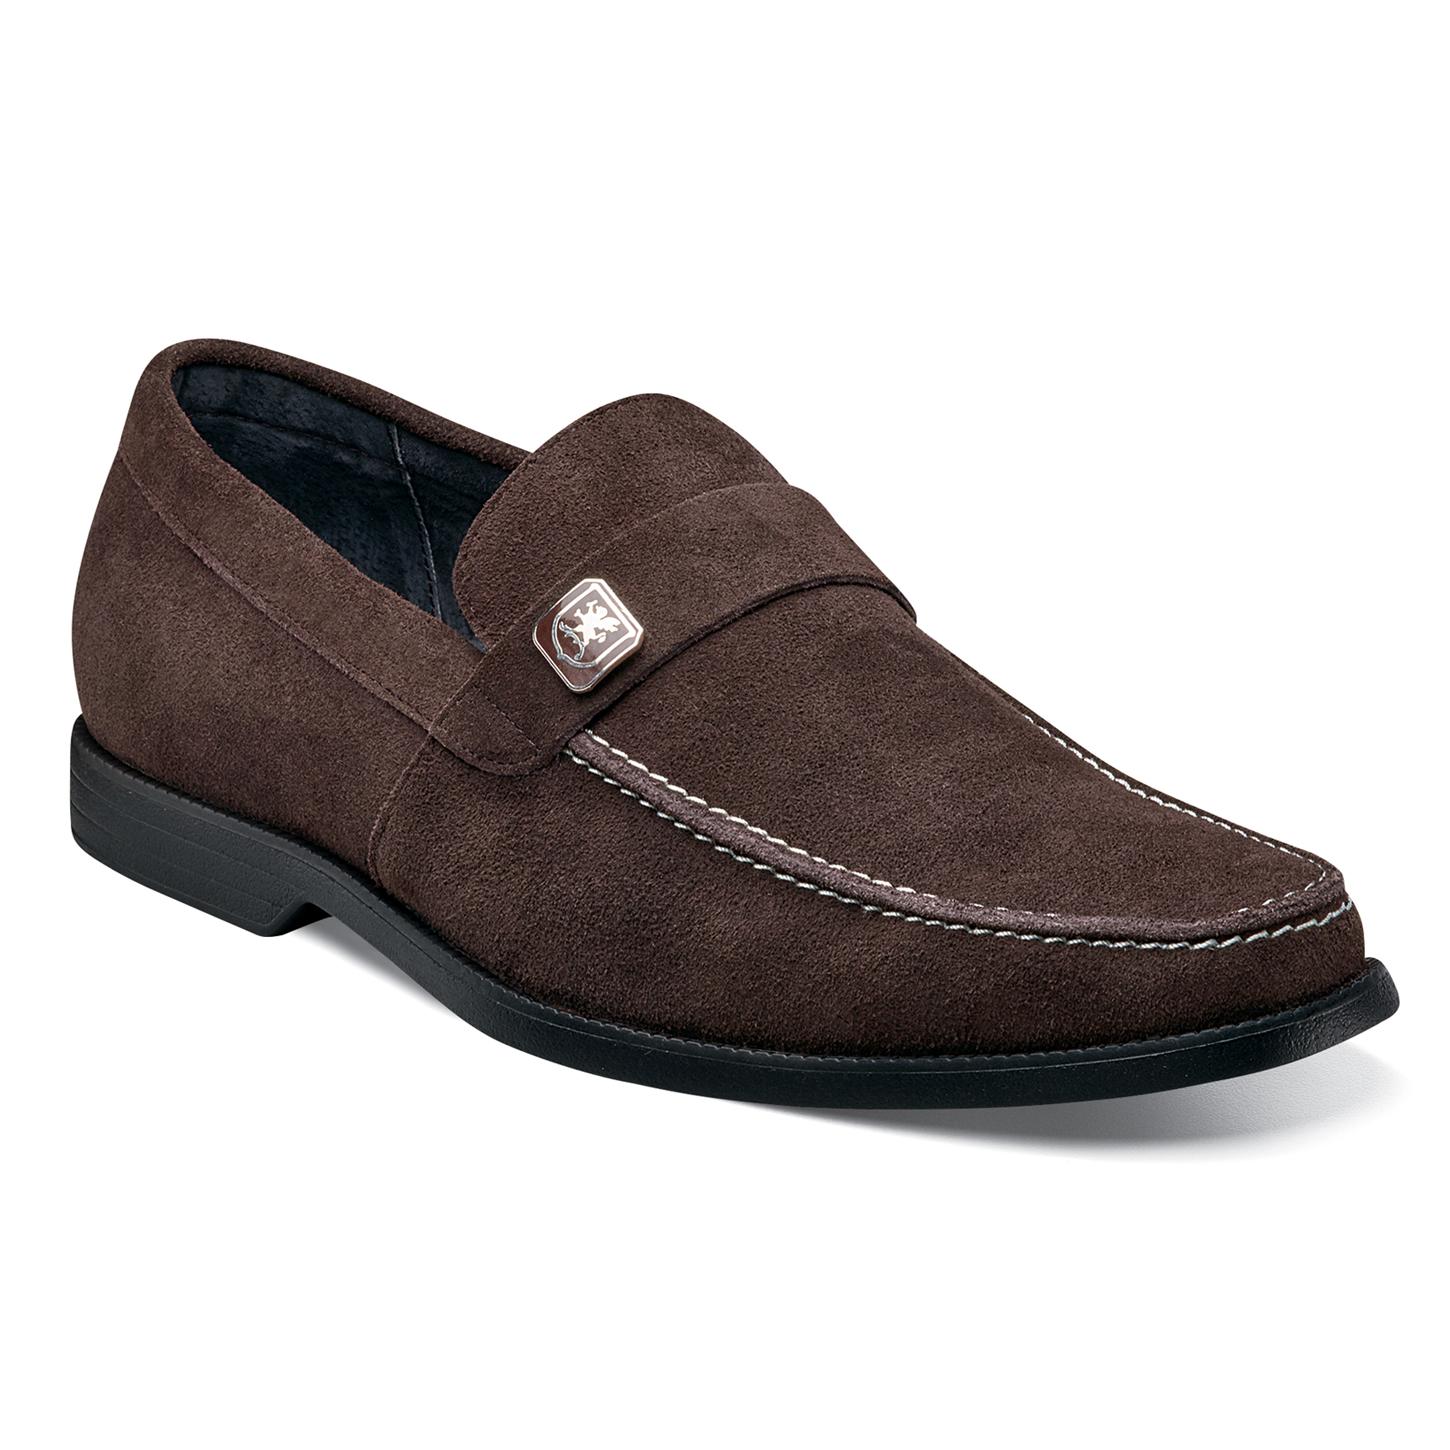 Stacy Adams Caspian Brown Suede Moc Toe Loafer Shoes 24955 - $79.90 ...